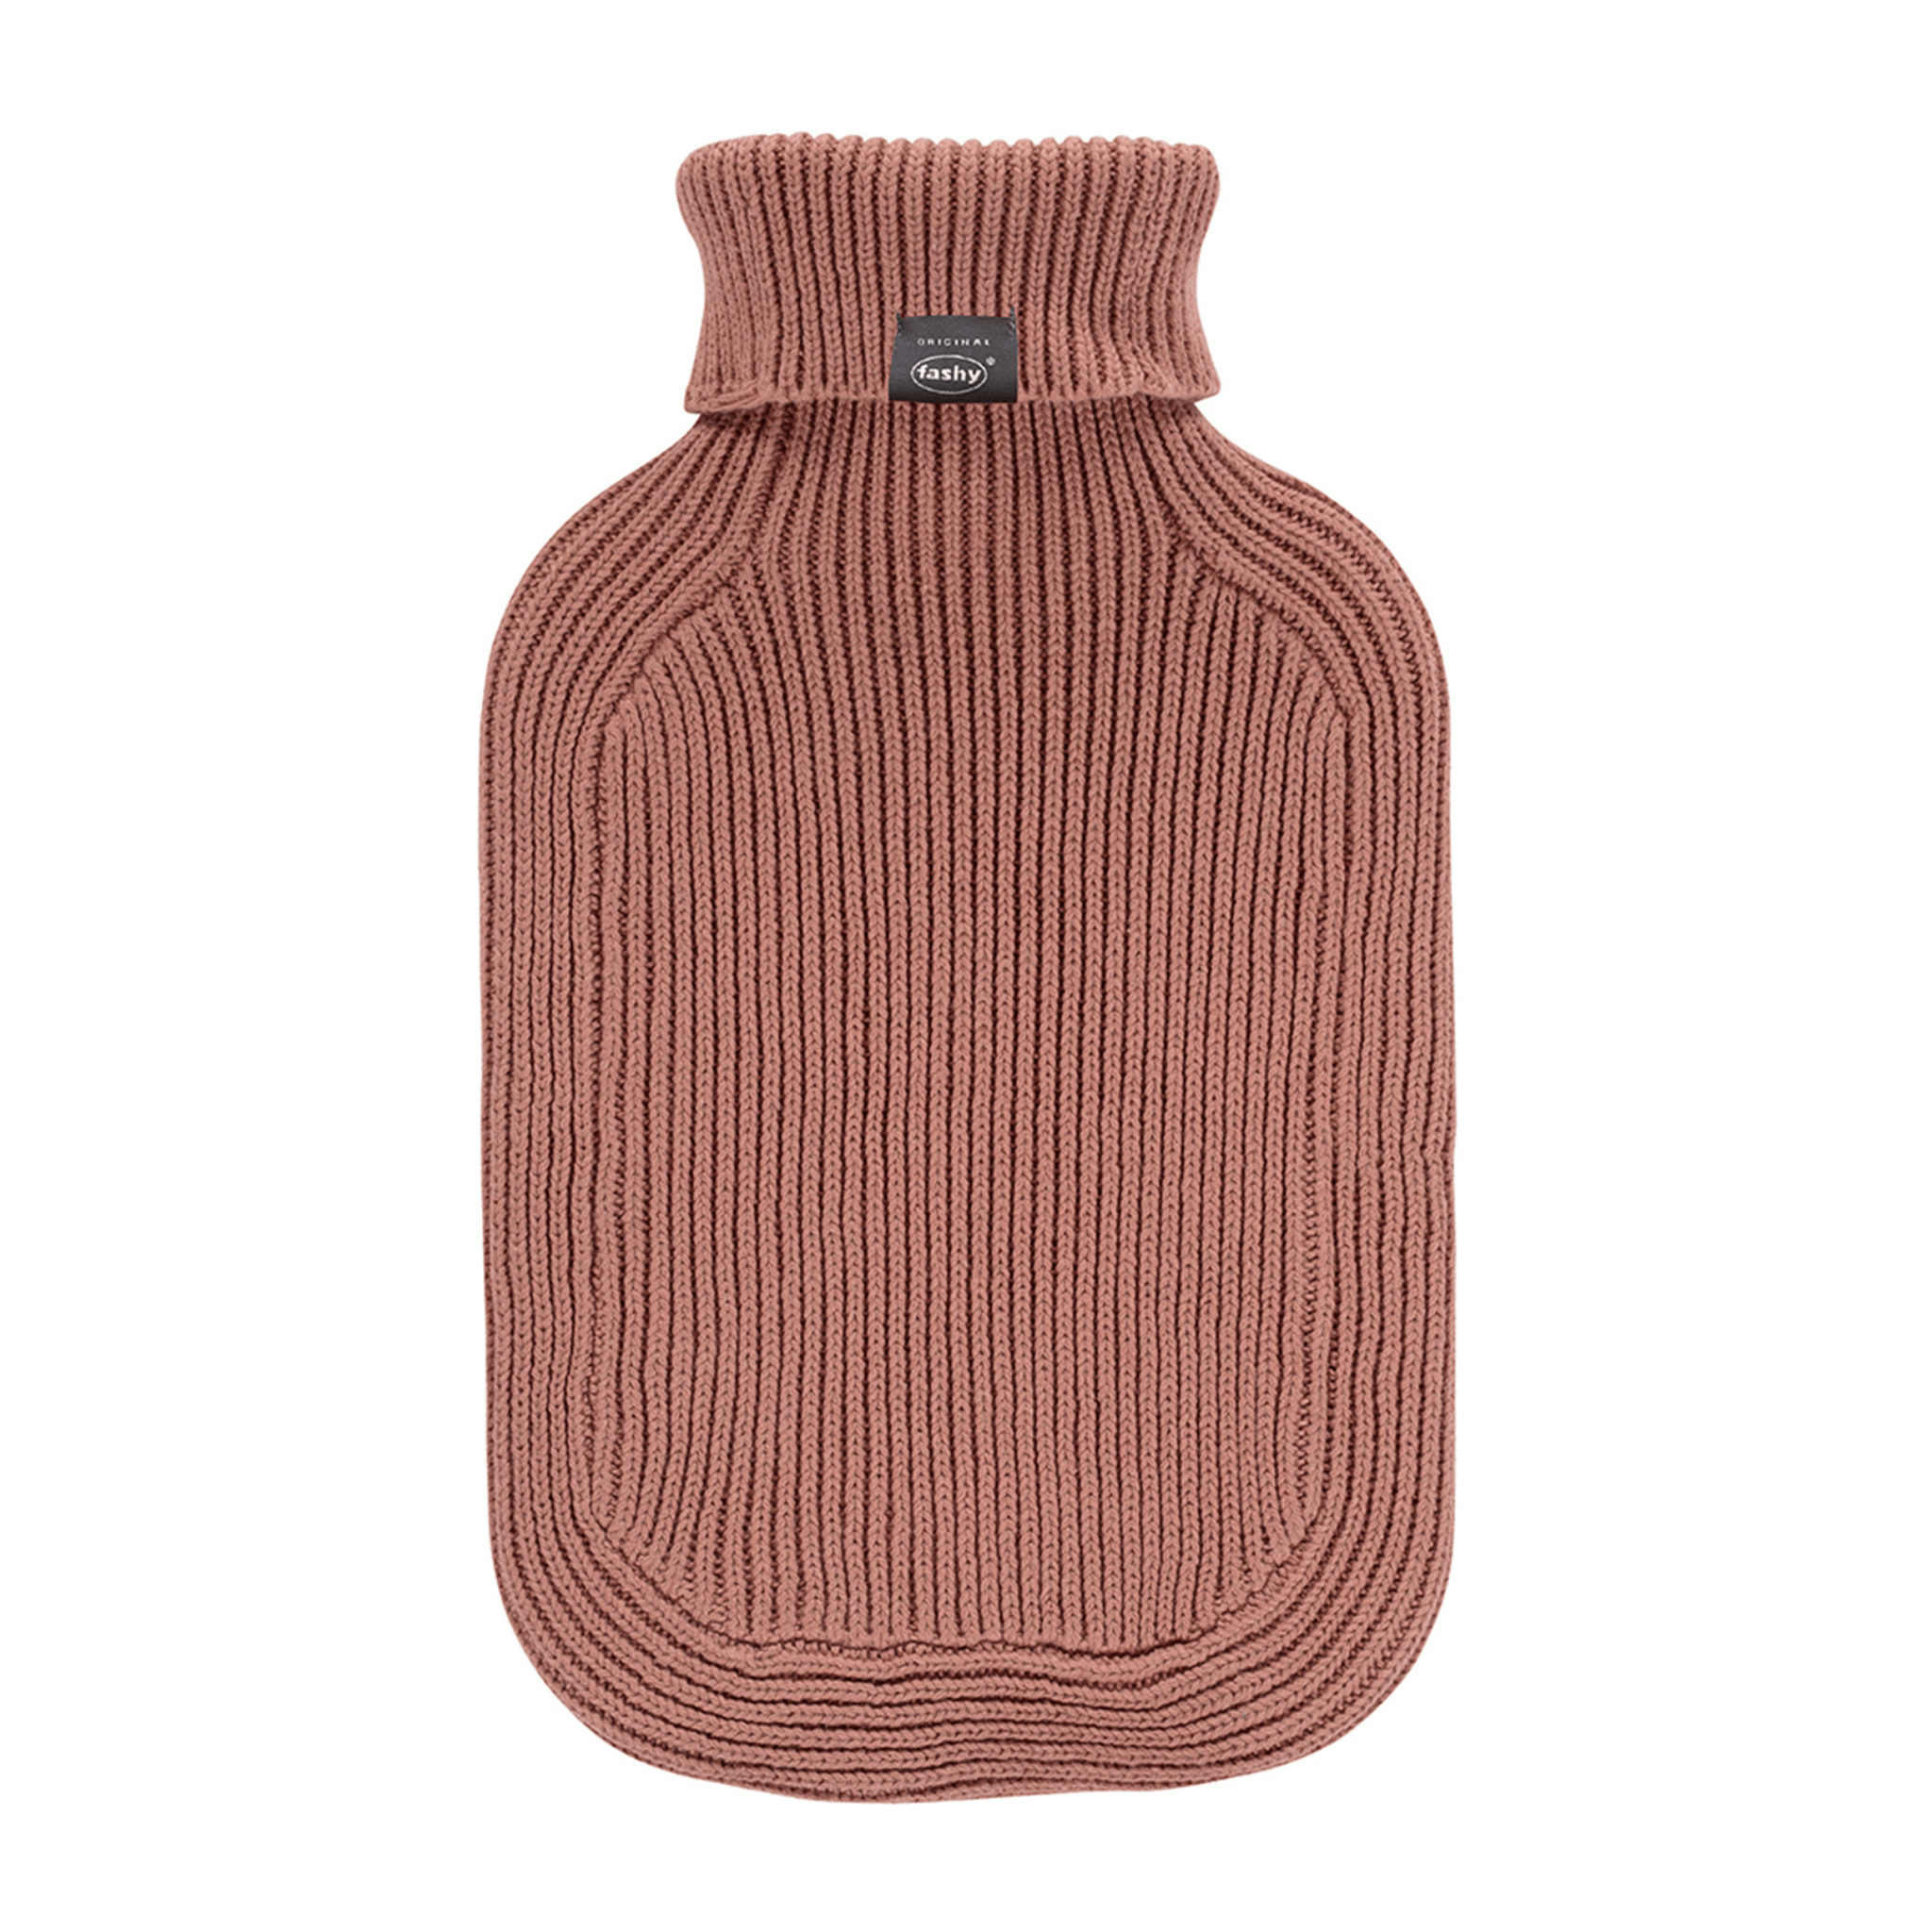 2 Litre Fashy Hot Water Bottle with Cafe Au Lait Turtleneck Knitted Cotton Cover